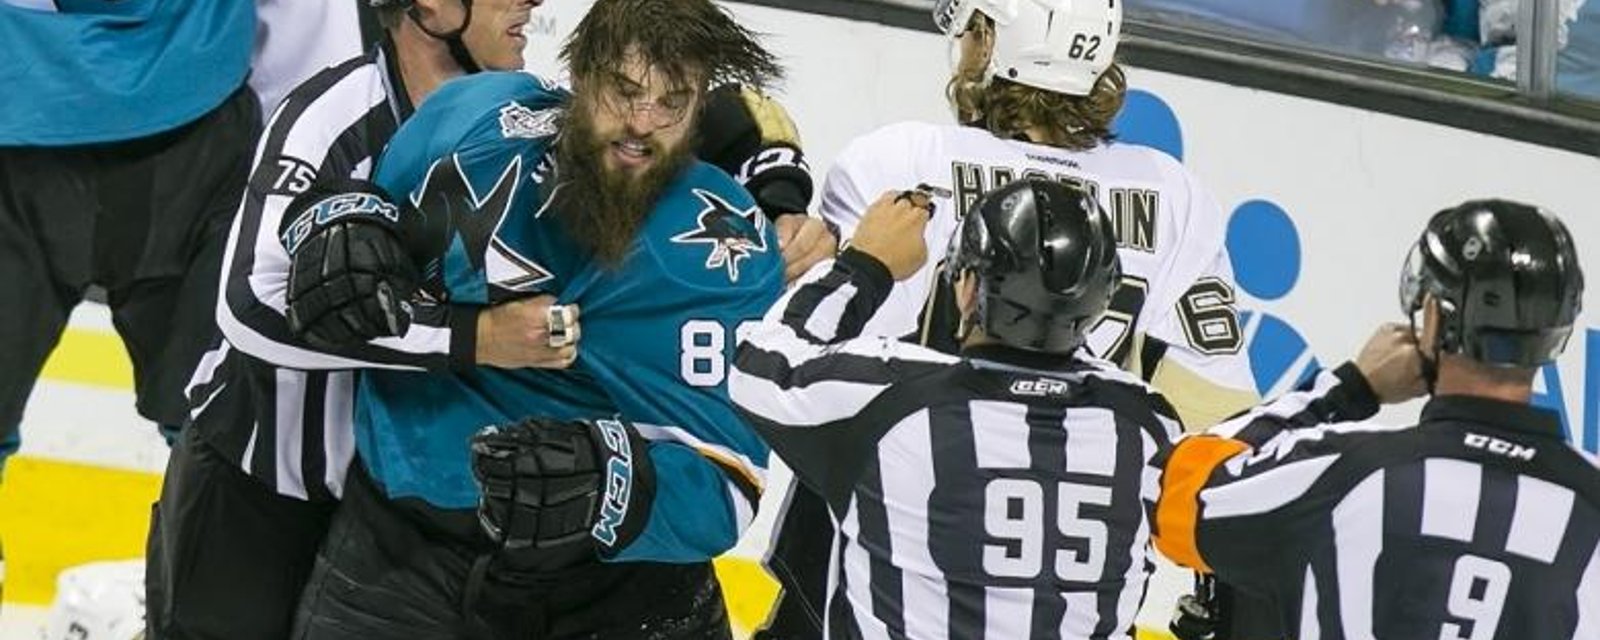 Burns on lack of desperation from Sharks: F***, check your pulse.